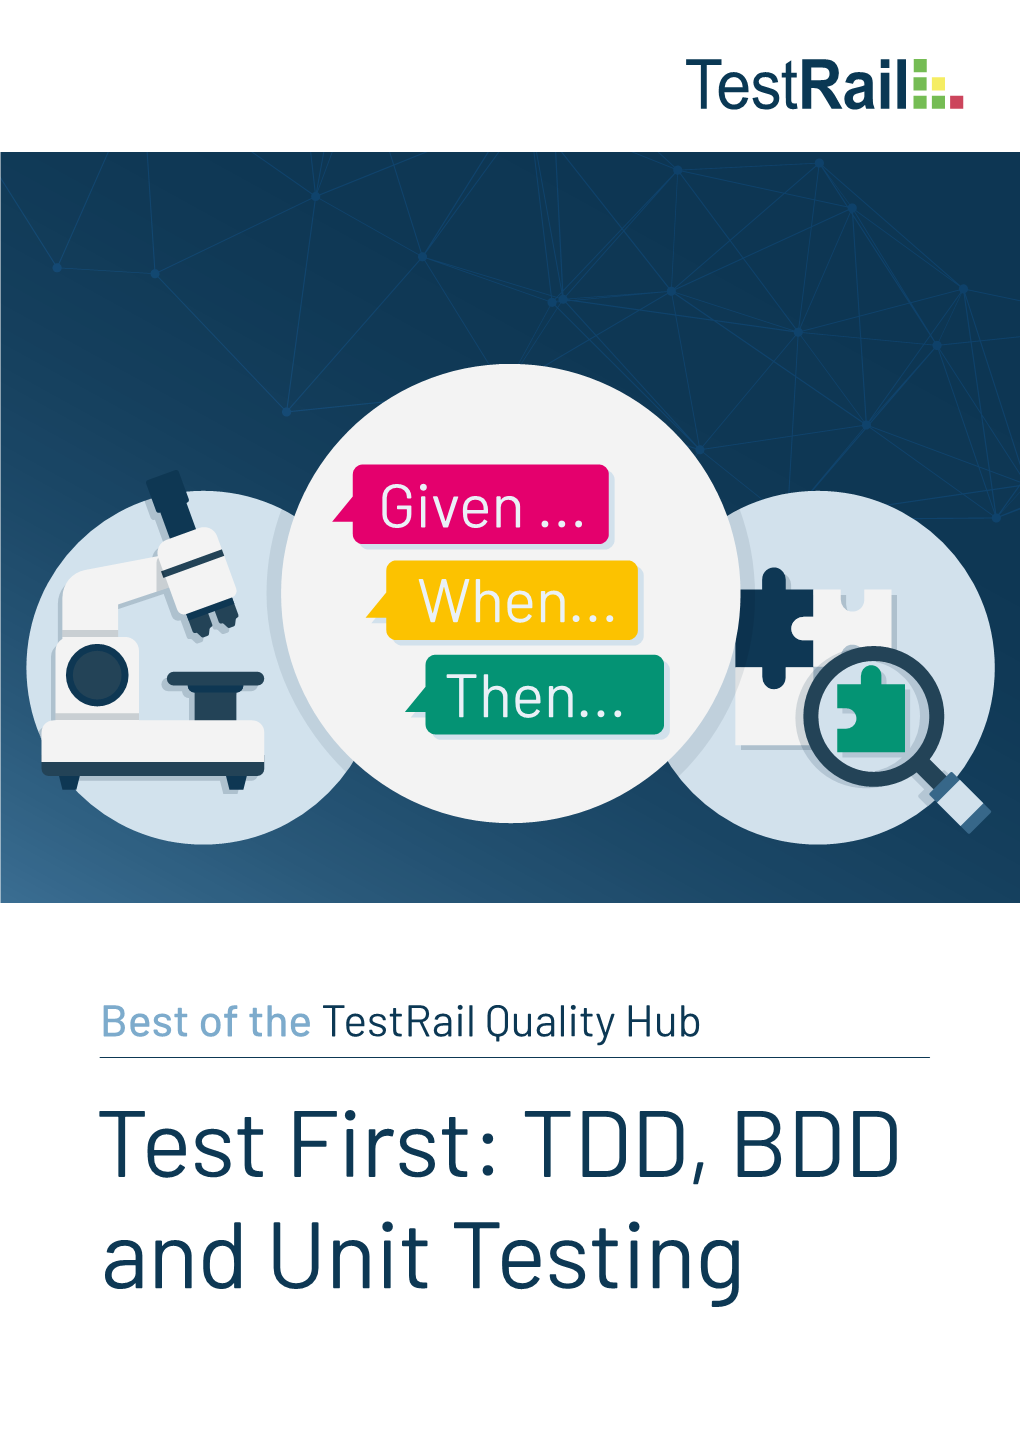 TDD, BDD and Unit Testing It’S Well-Known That the Most Costly Defect to Fix -- in Time, Effort, and Pain to the Team -- Is One That Makes It Into Production